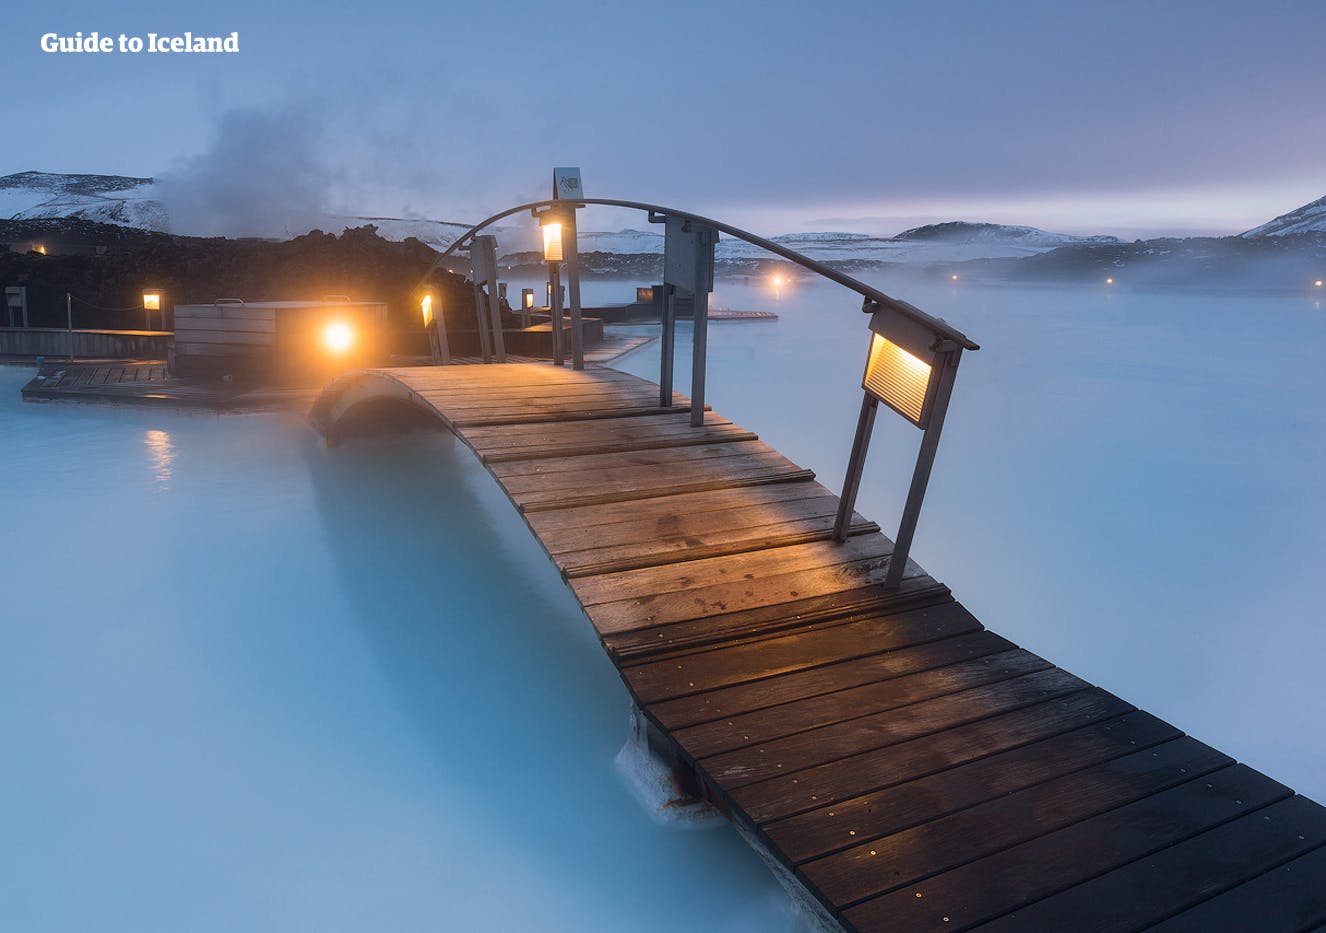 A great cure for jet-lag is a soak in the geothermal waters of the Blue Lagoon